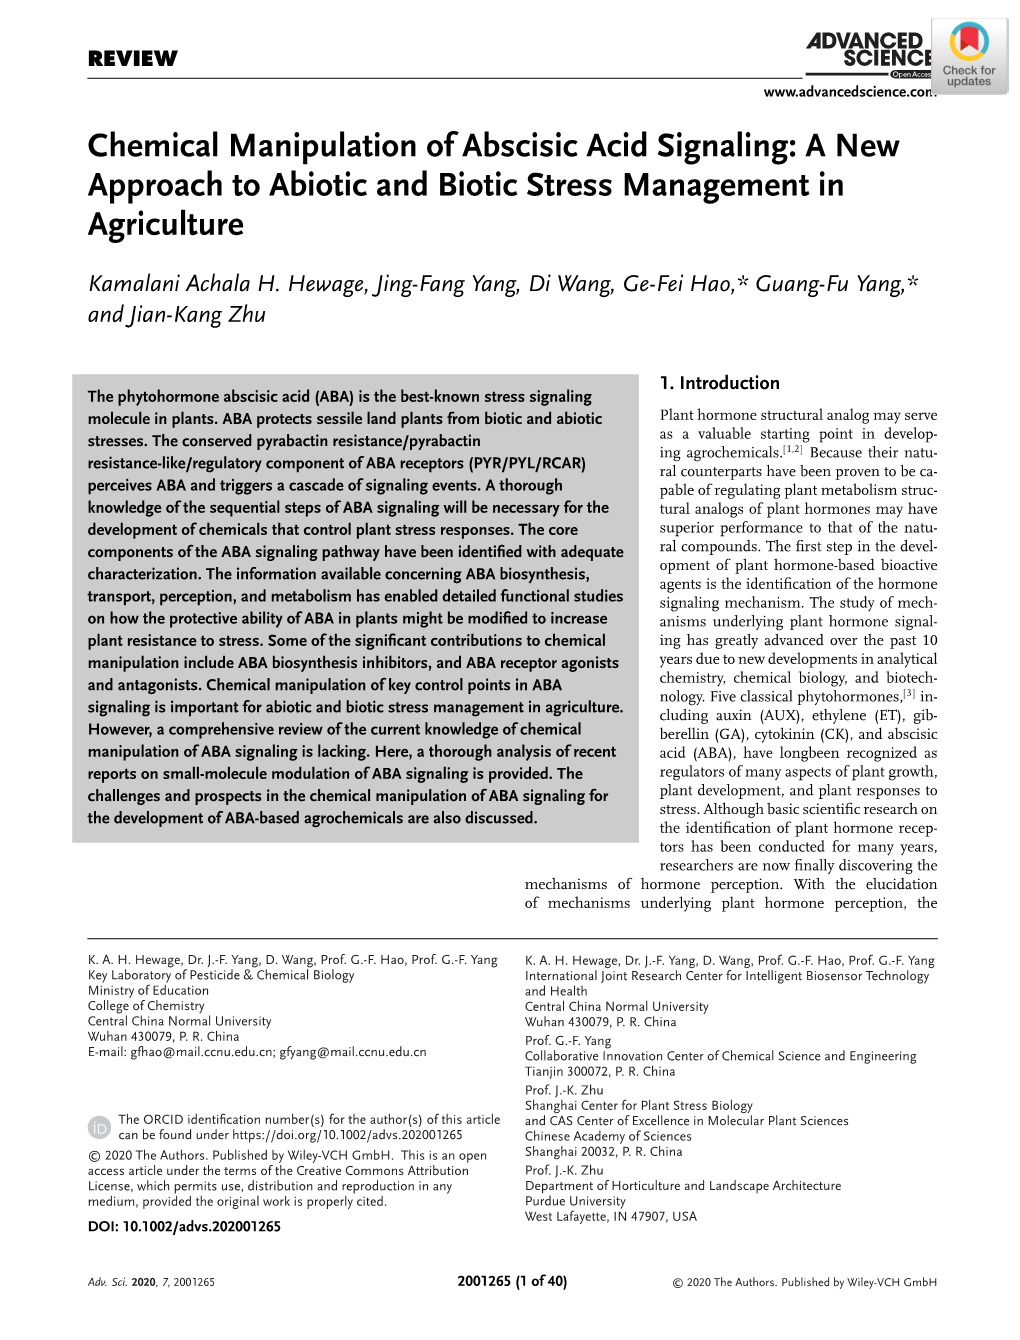 Chemical Manipulation of Abscisic Acid Signaling: a New Approach to Abiotic and Biotic Stress Management in Agriculture